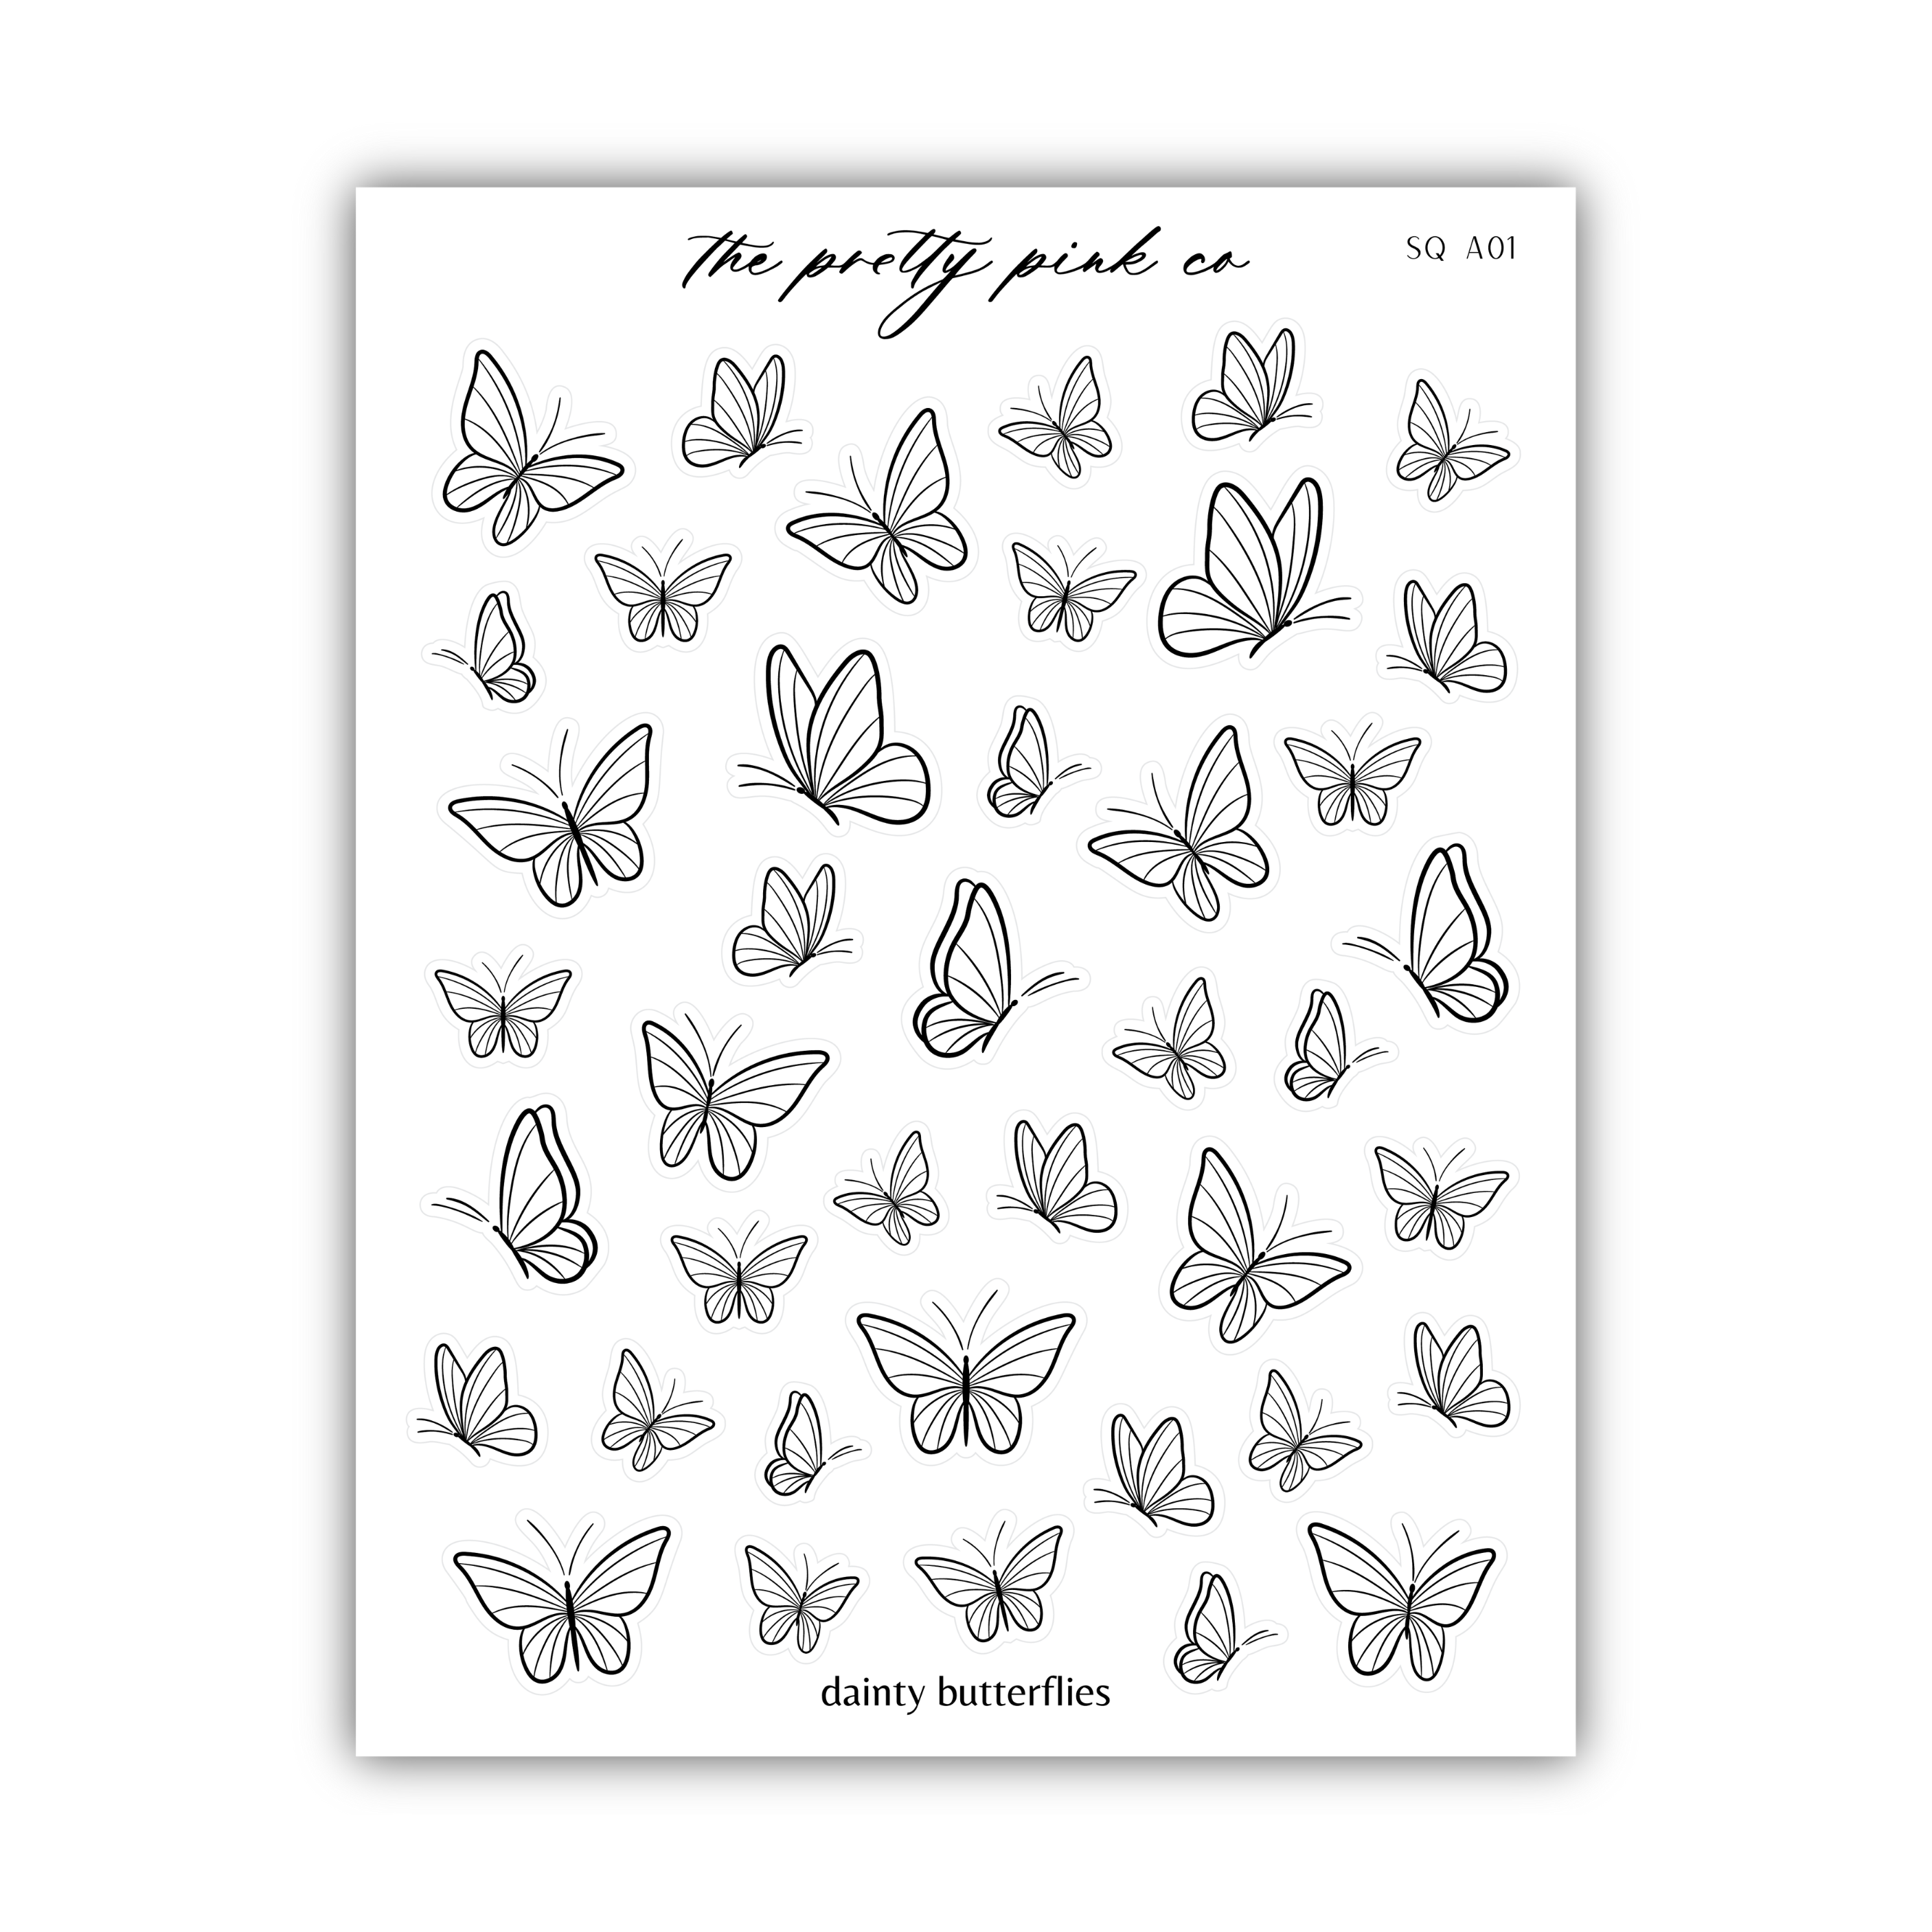 a black and white drawing of many butterflies